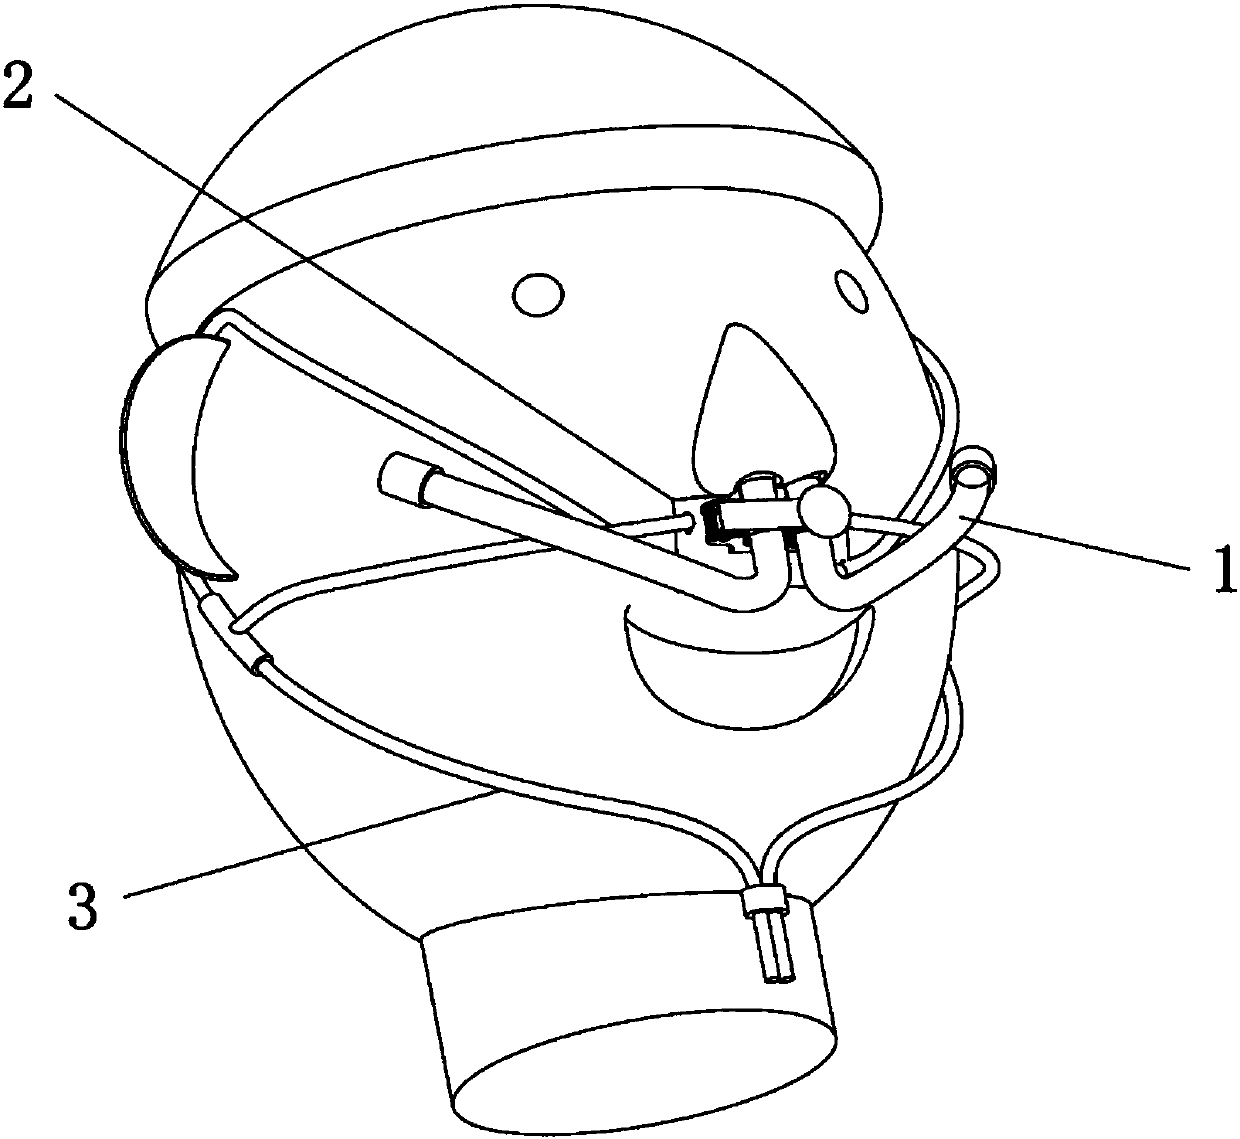 Reverse-expansion nasal catheter fixing device with protective function